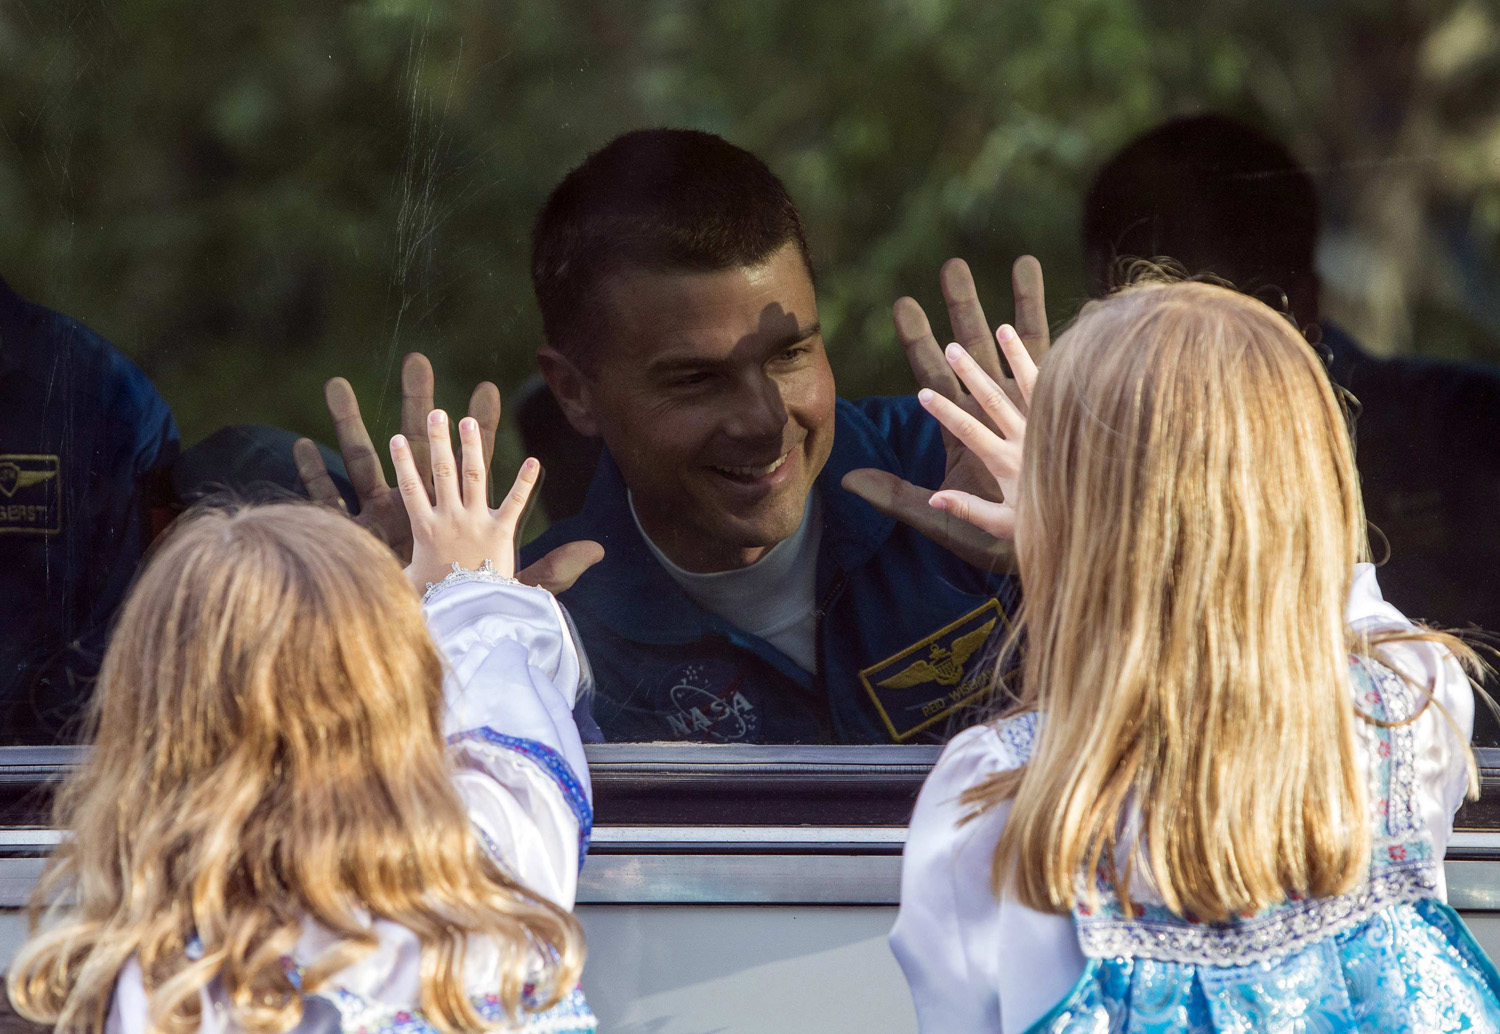 Reid Wiseman of the U.S., a member of the International Space Station crew, waves to his daughters from a bus before departure for a final pre-launch preparation at the Baikonur cosmodrome on May 28, 2014.